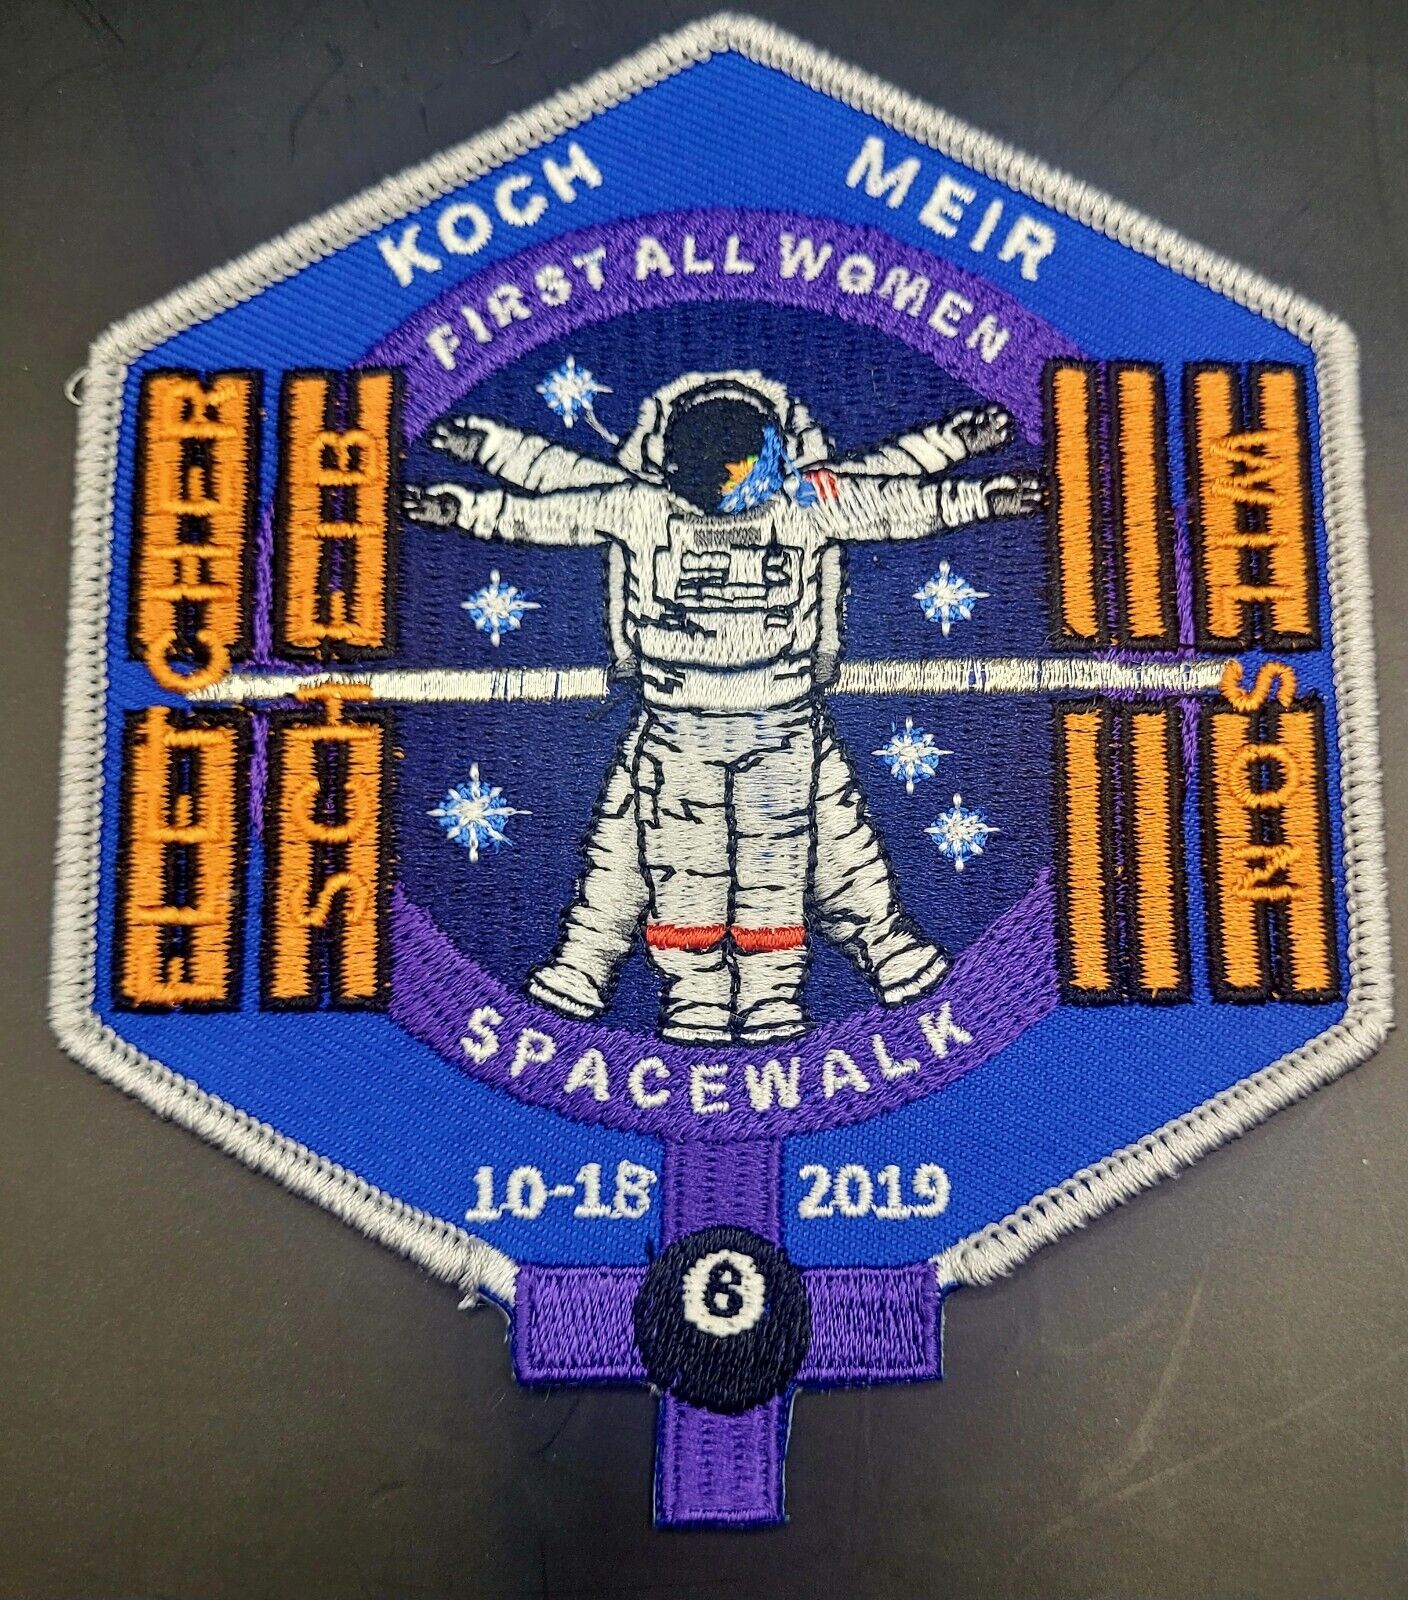 Patch: 1st All Woman Space Walk